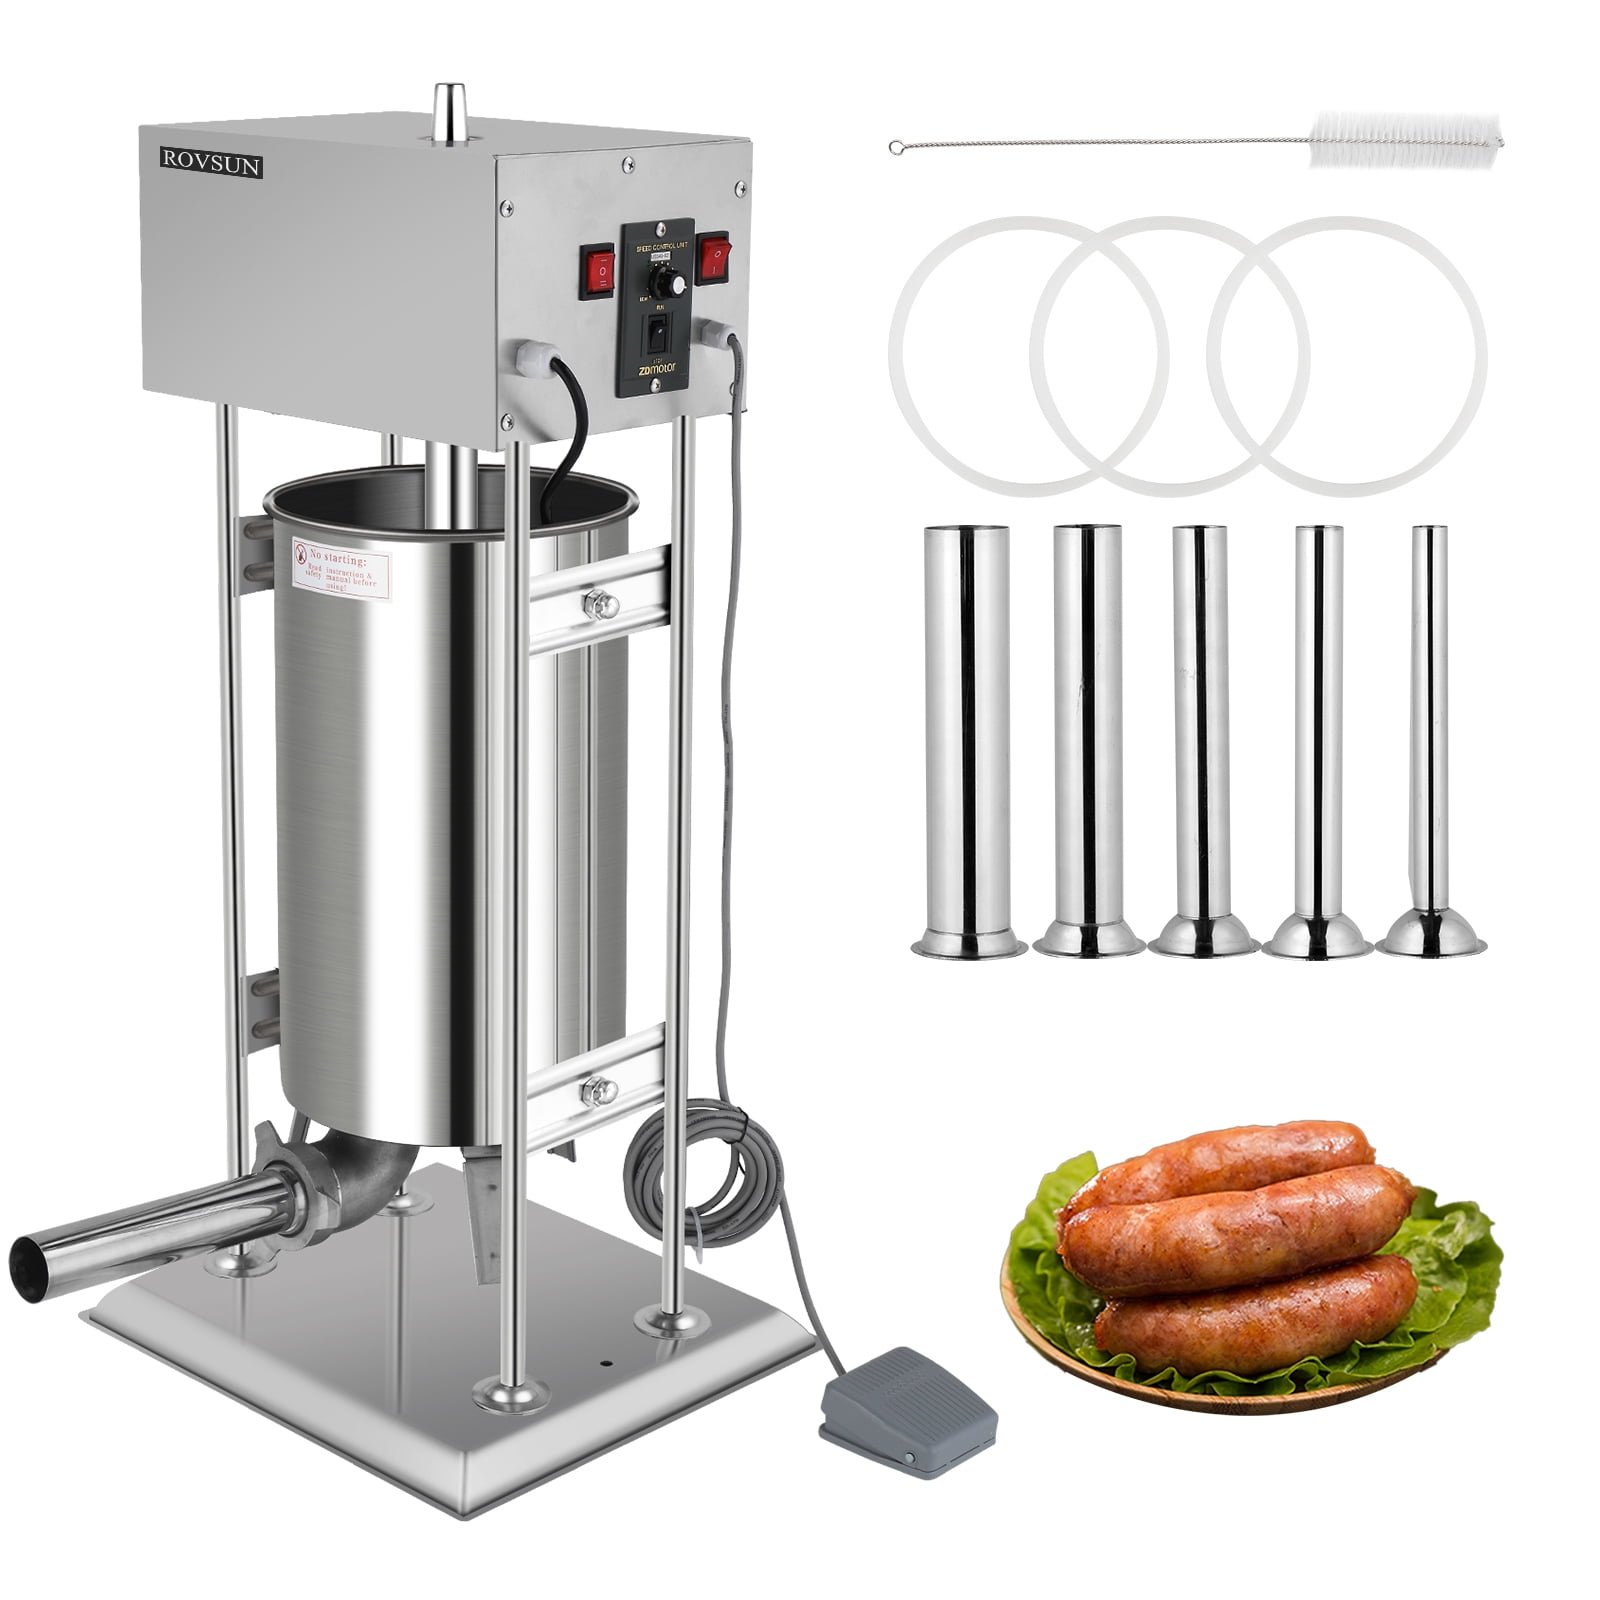 Meat Poultry Tools Fill Sausage Stainless 165mm65inch Homemade Maker Manual  Syringe Machine Stuffer Steel Filling 230918 From Shu10, $14.27